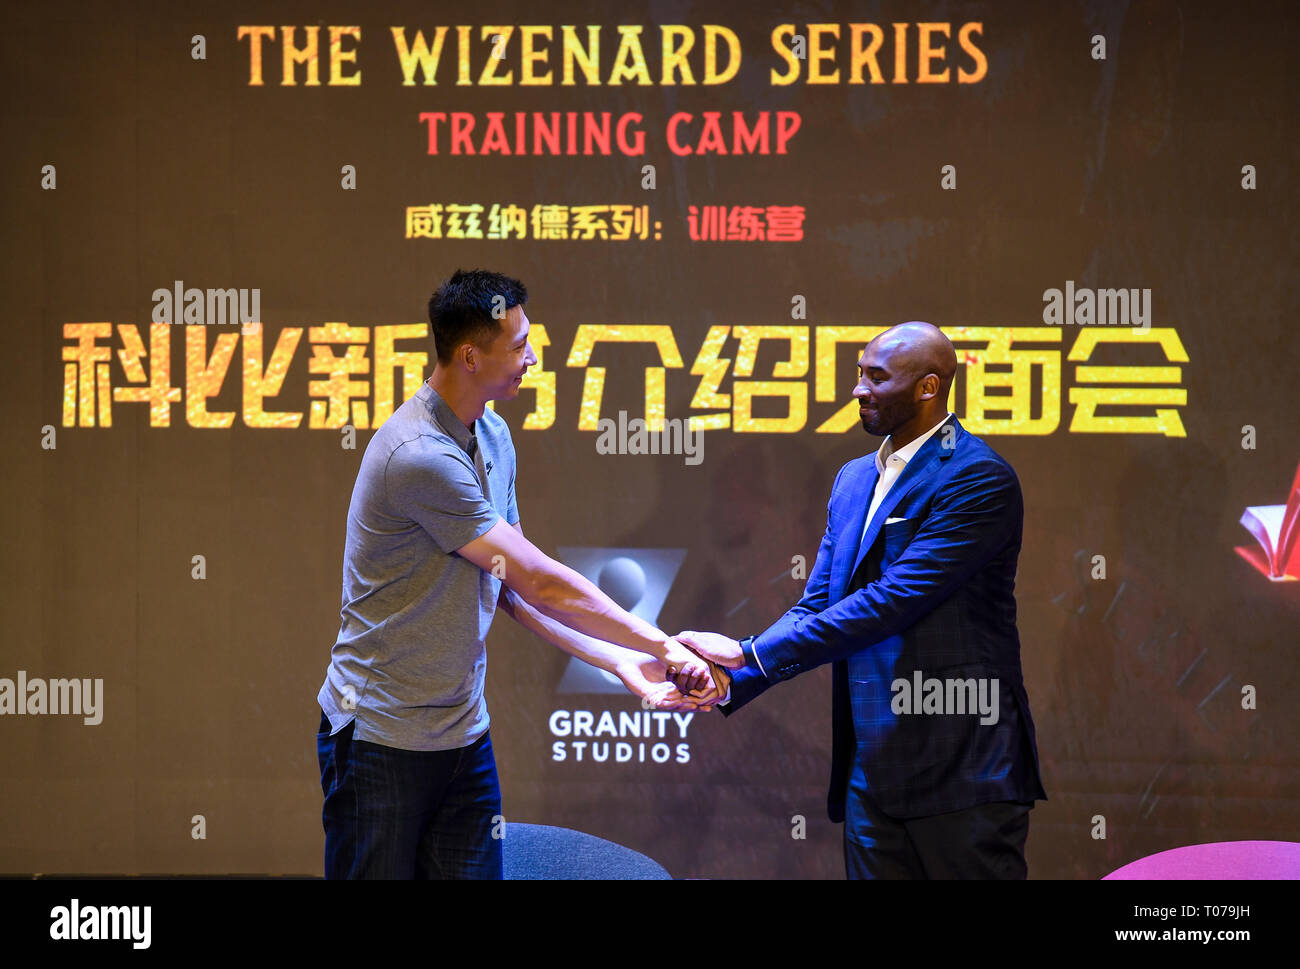 Beijing China S Guangdong Province 17th Mar 2019 Nba Legend Kobe Bryant R Shakes Hand With Chinese Basketball Player Yi Jianlian During Kobe S Book Sharing Conference In A Middle School In Shenzhen South